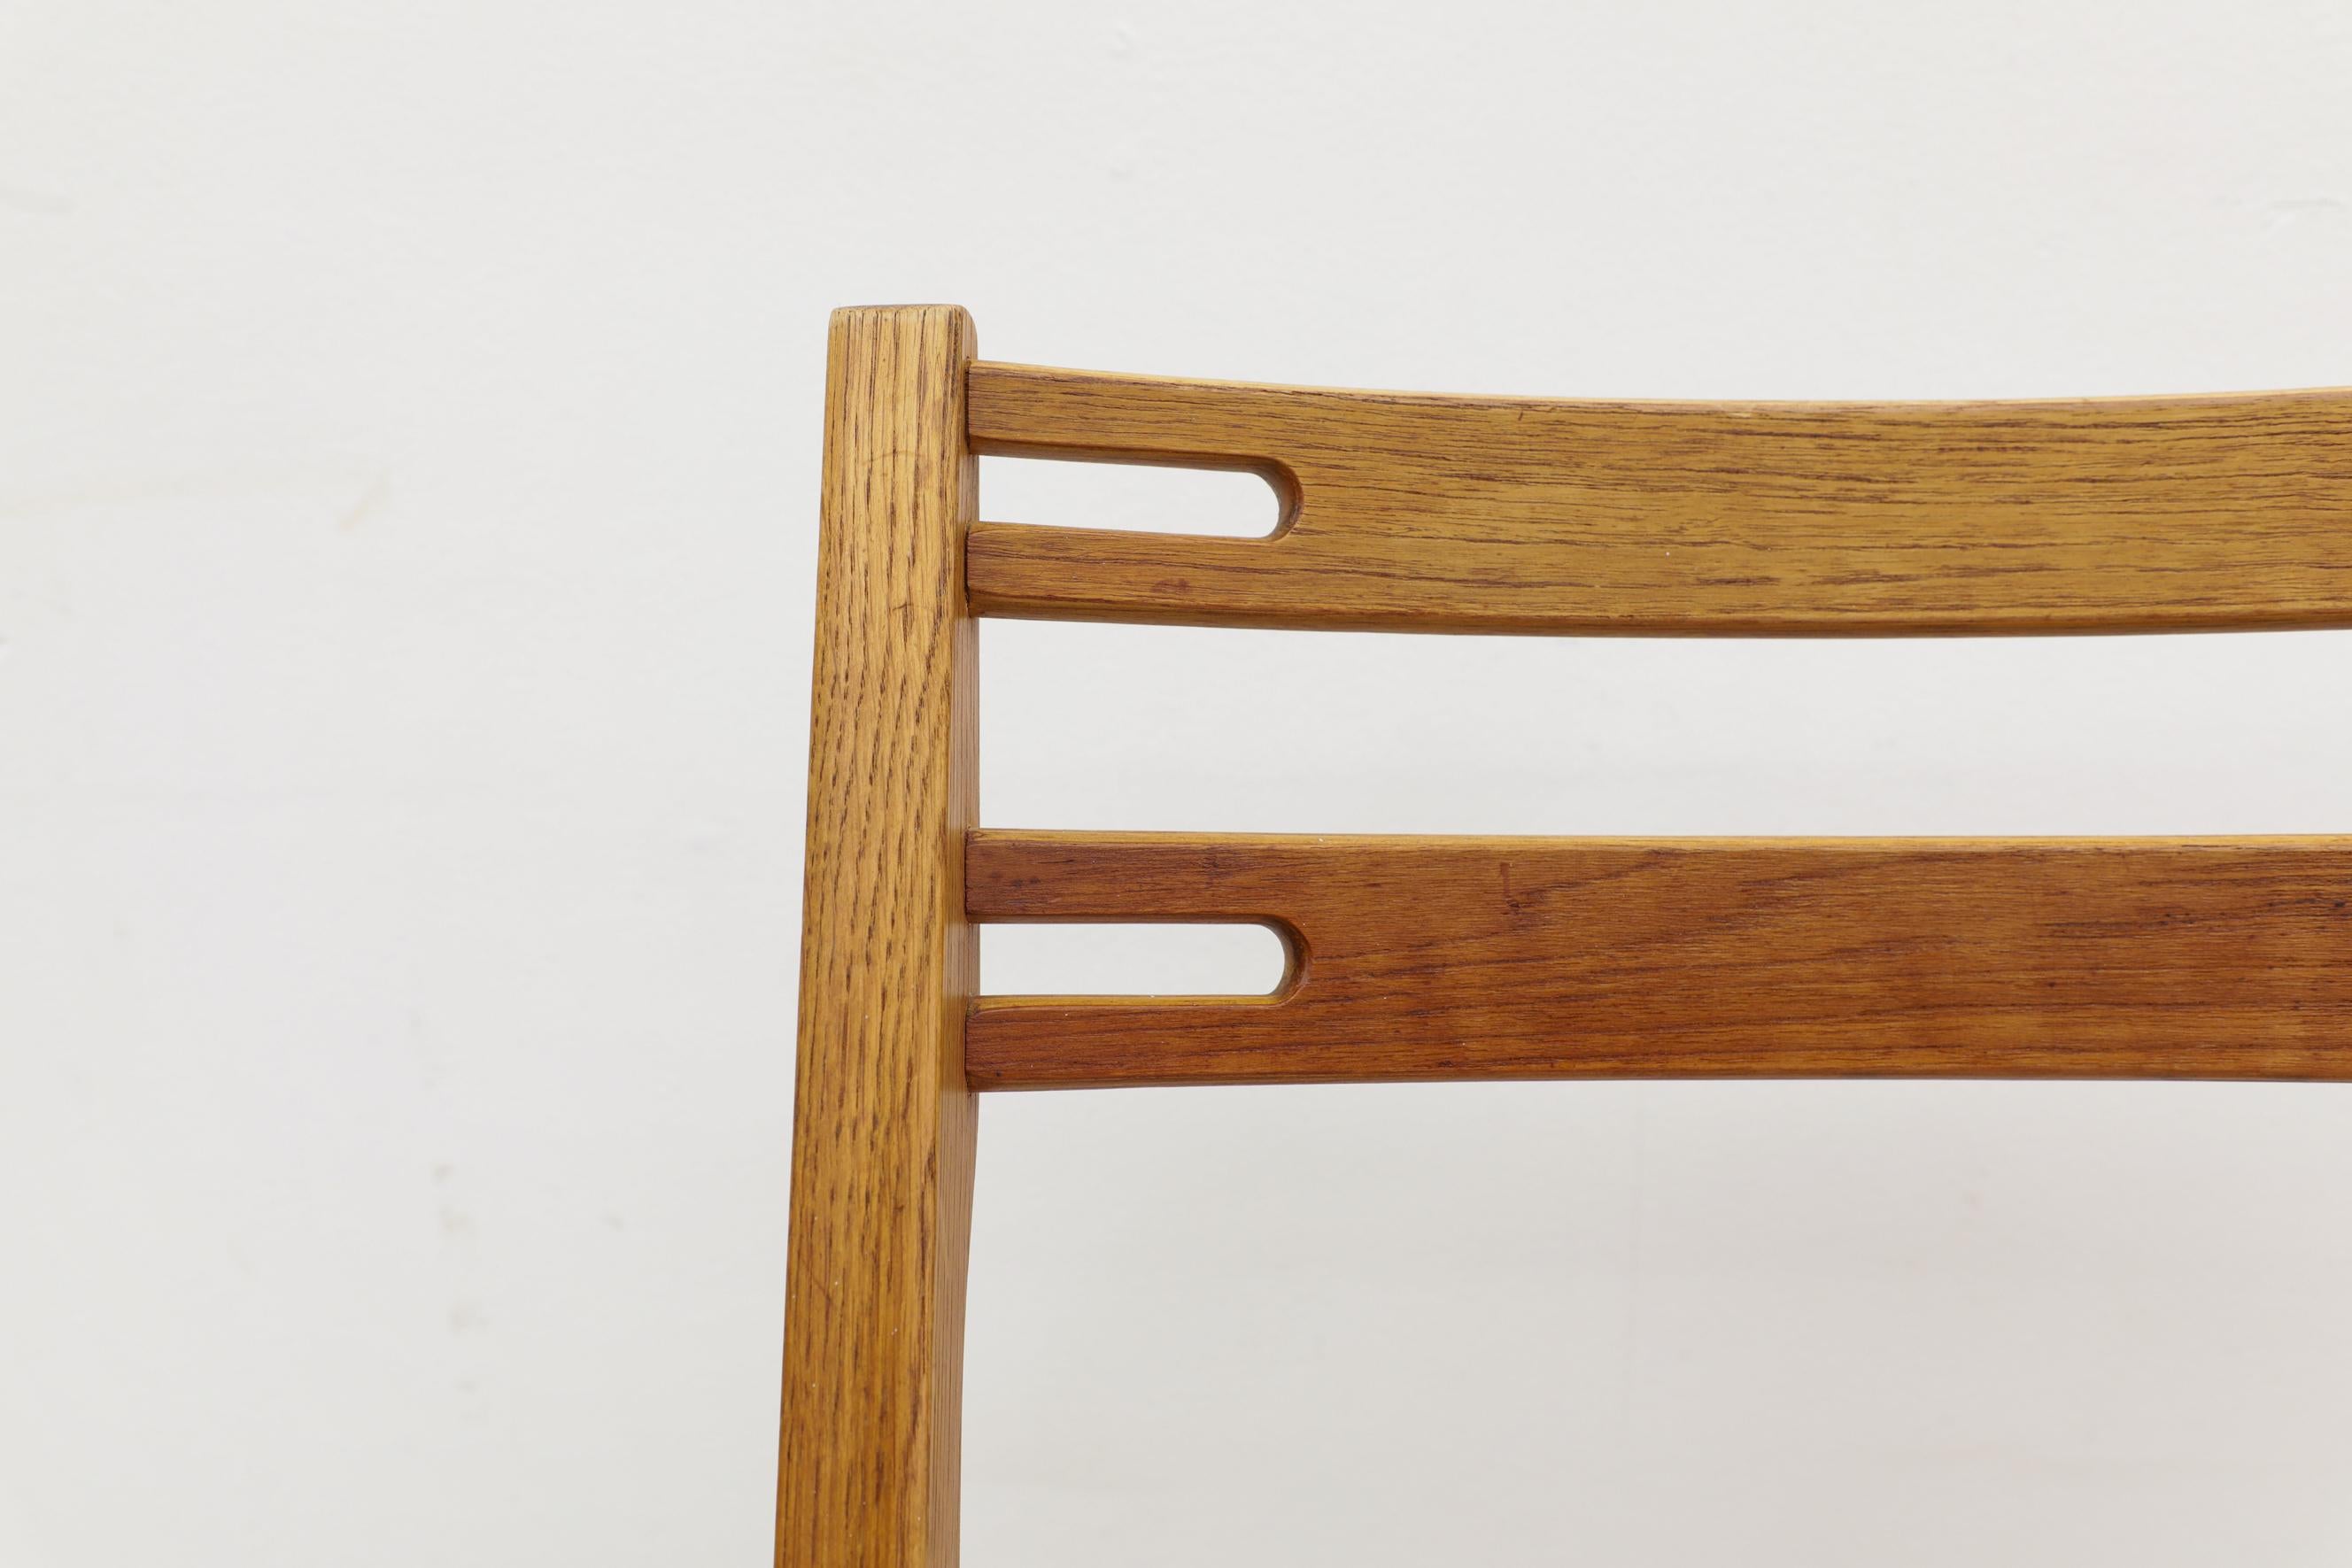 Single Hans Wegner Inspired Oak Dining Chair with Compass Legs and Bowed Back For Sale 3